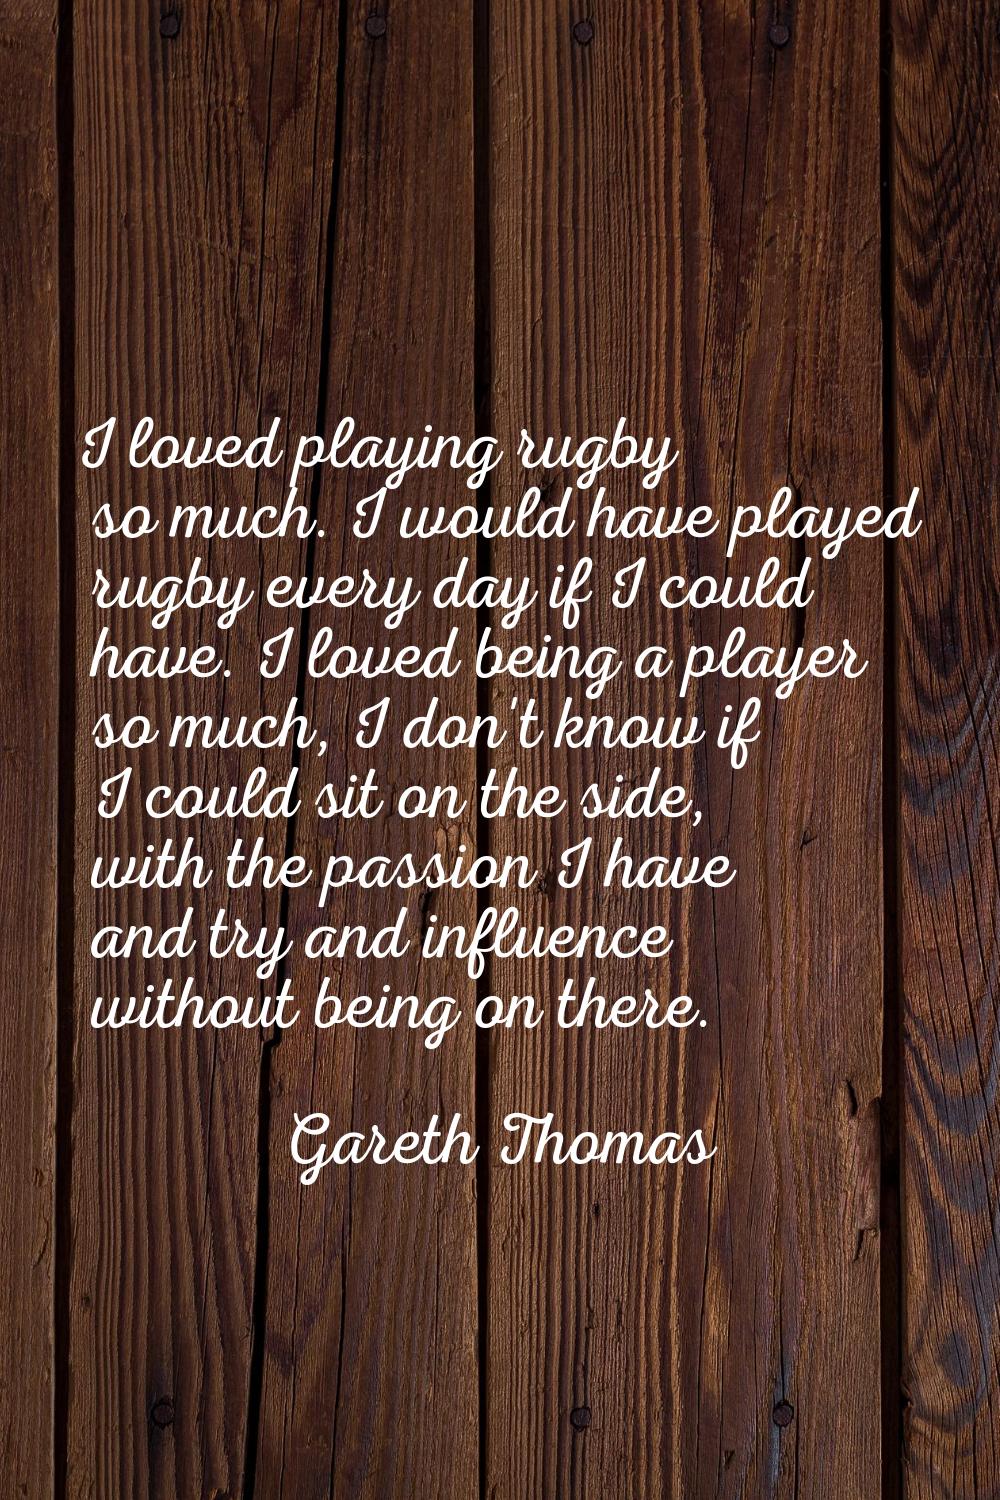 I loved playing rugby so much. I would have played rugby every day if I could have. I loved being a